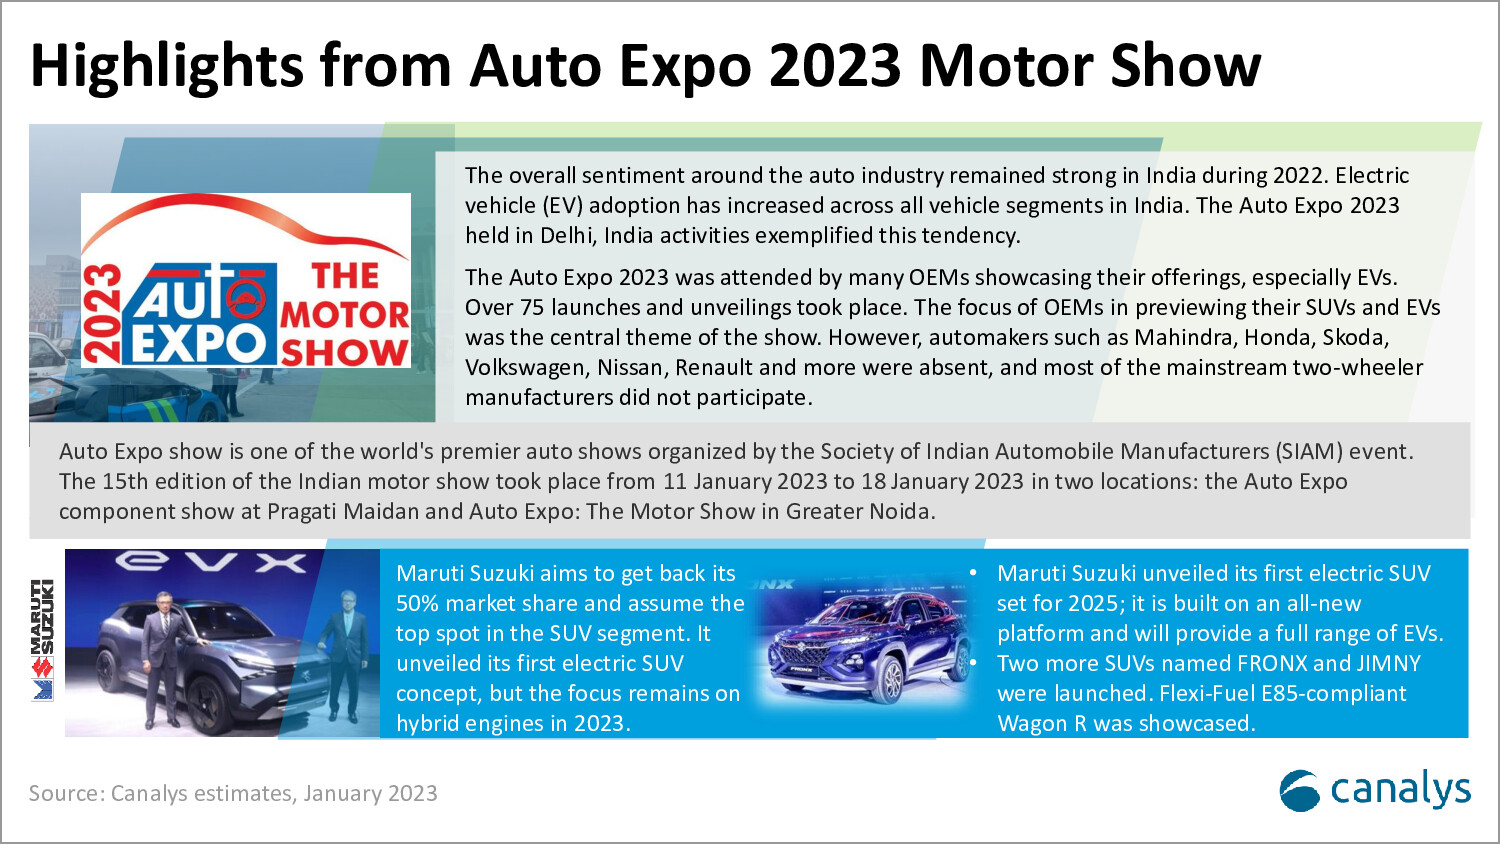 India intelligent vehicles market overview and Auto Expo 2023 highlights